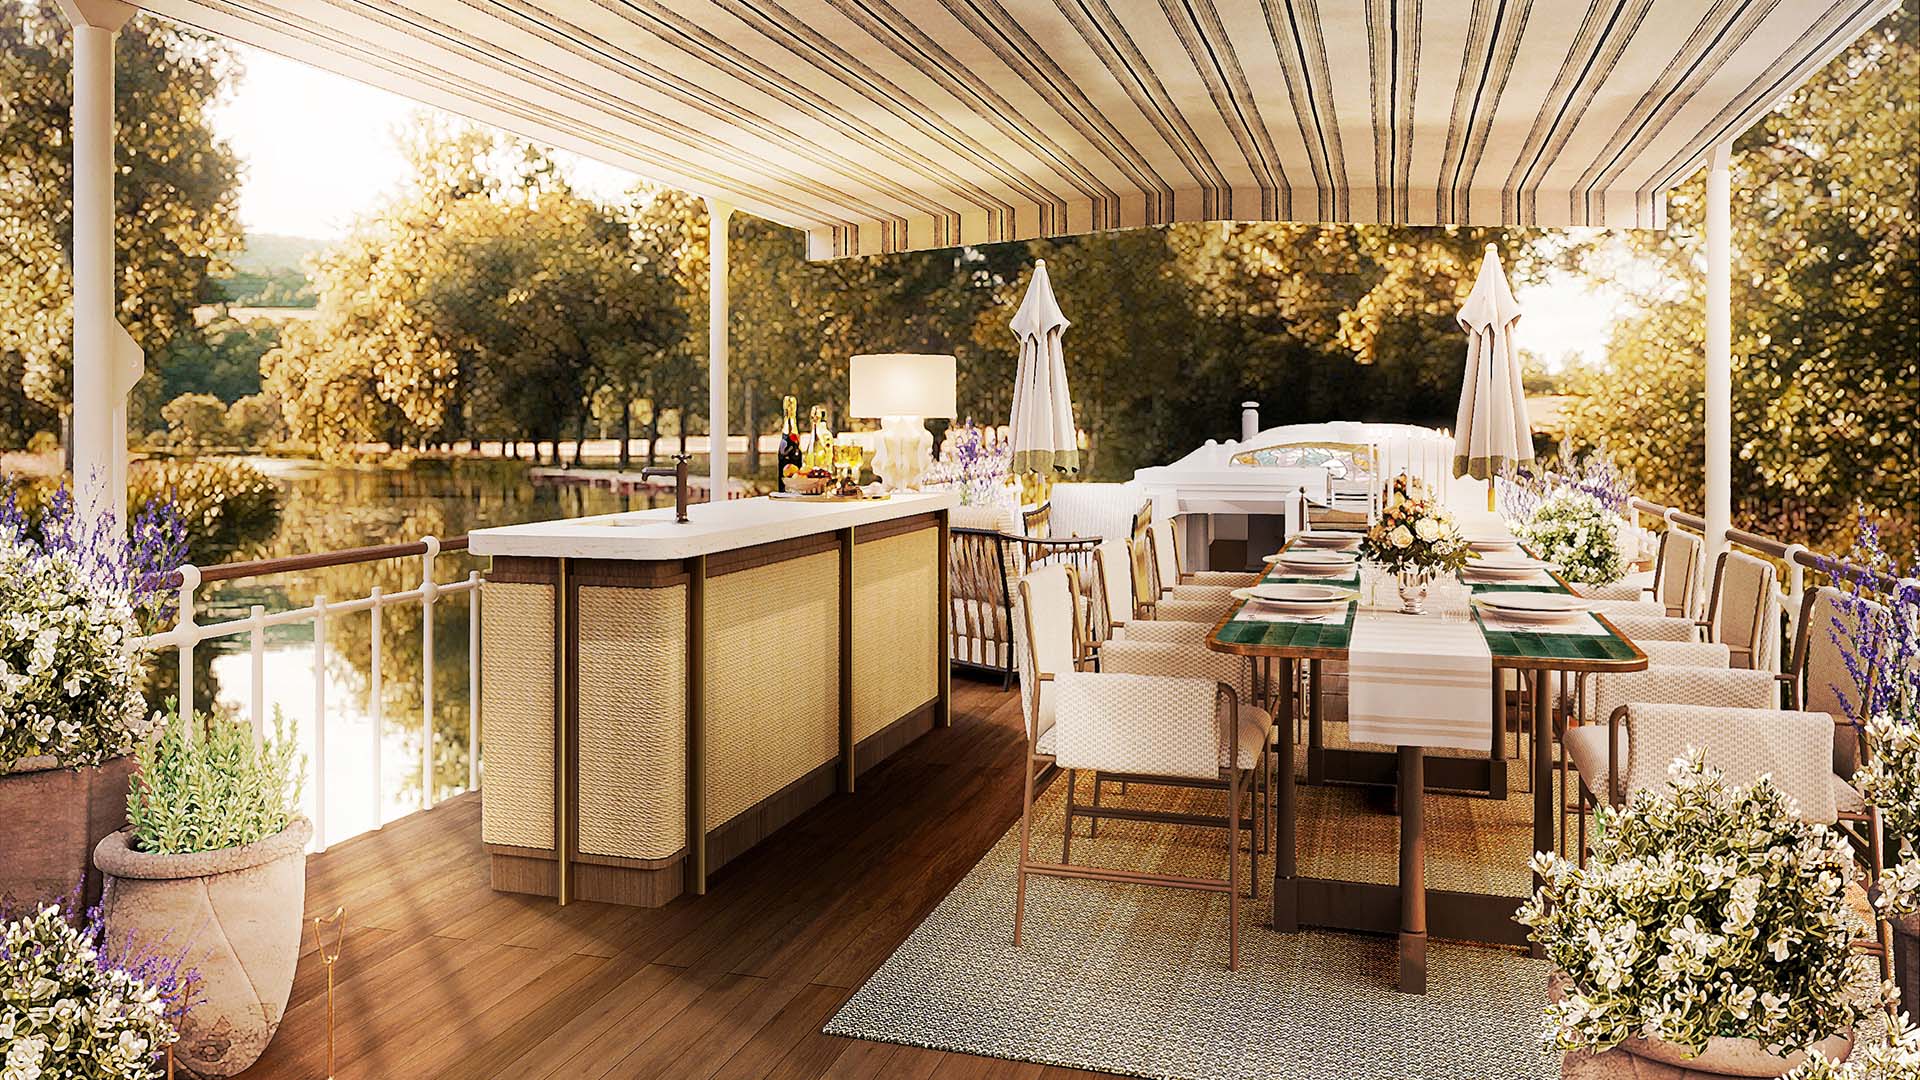 Experience the Champagne region on Coquelicot, Belmond’s new luxury barge